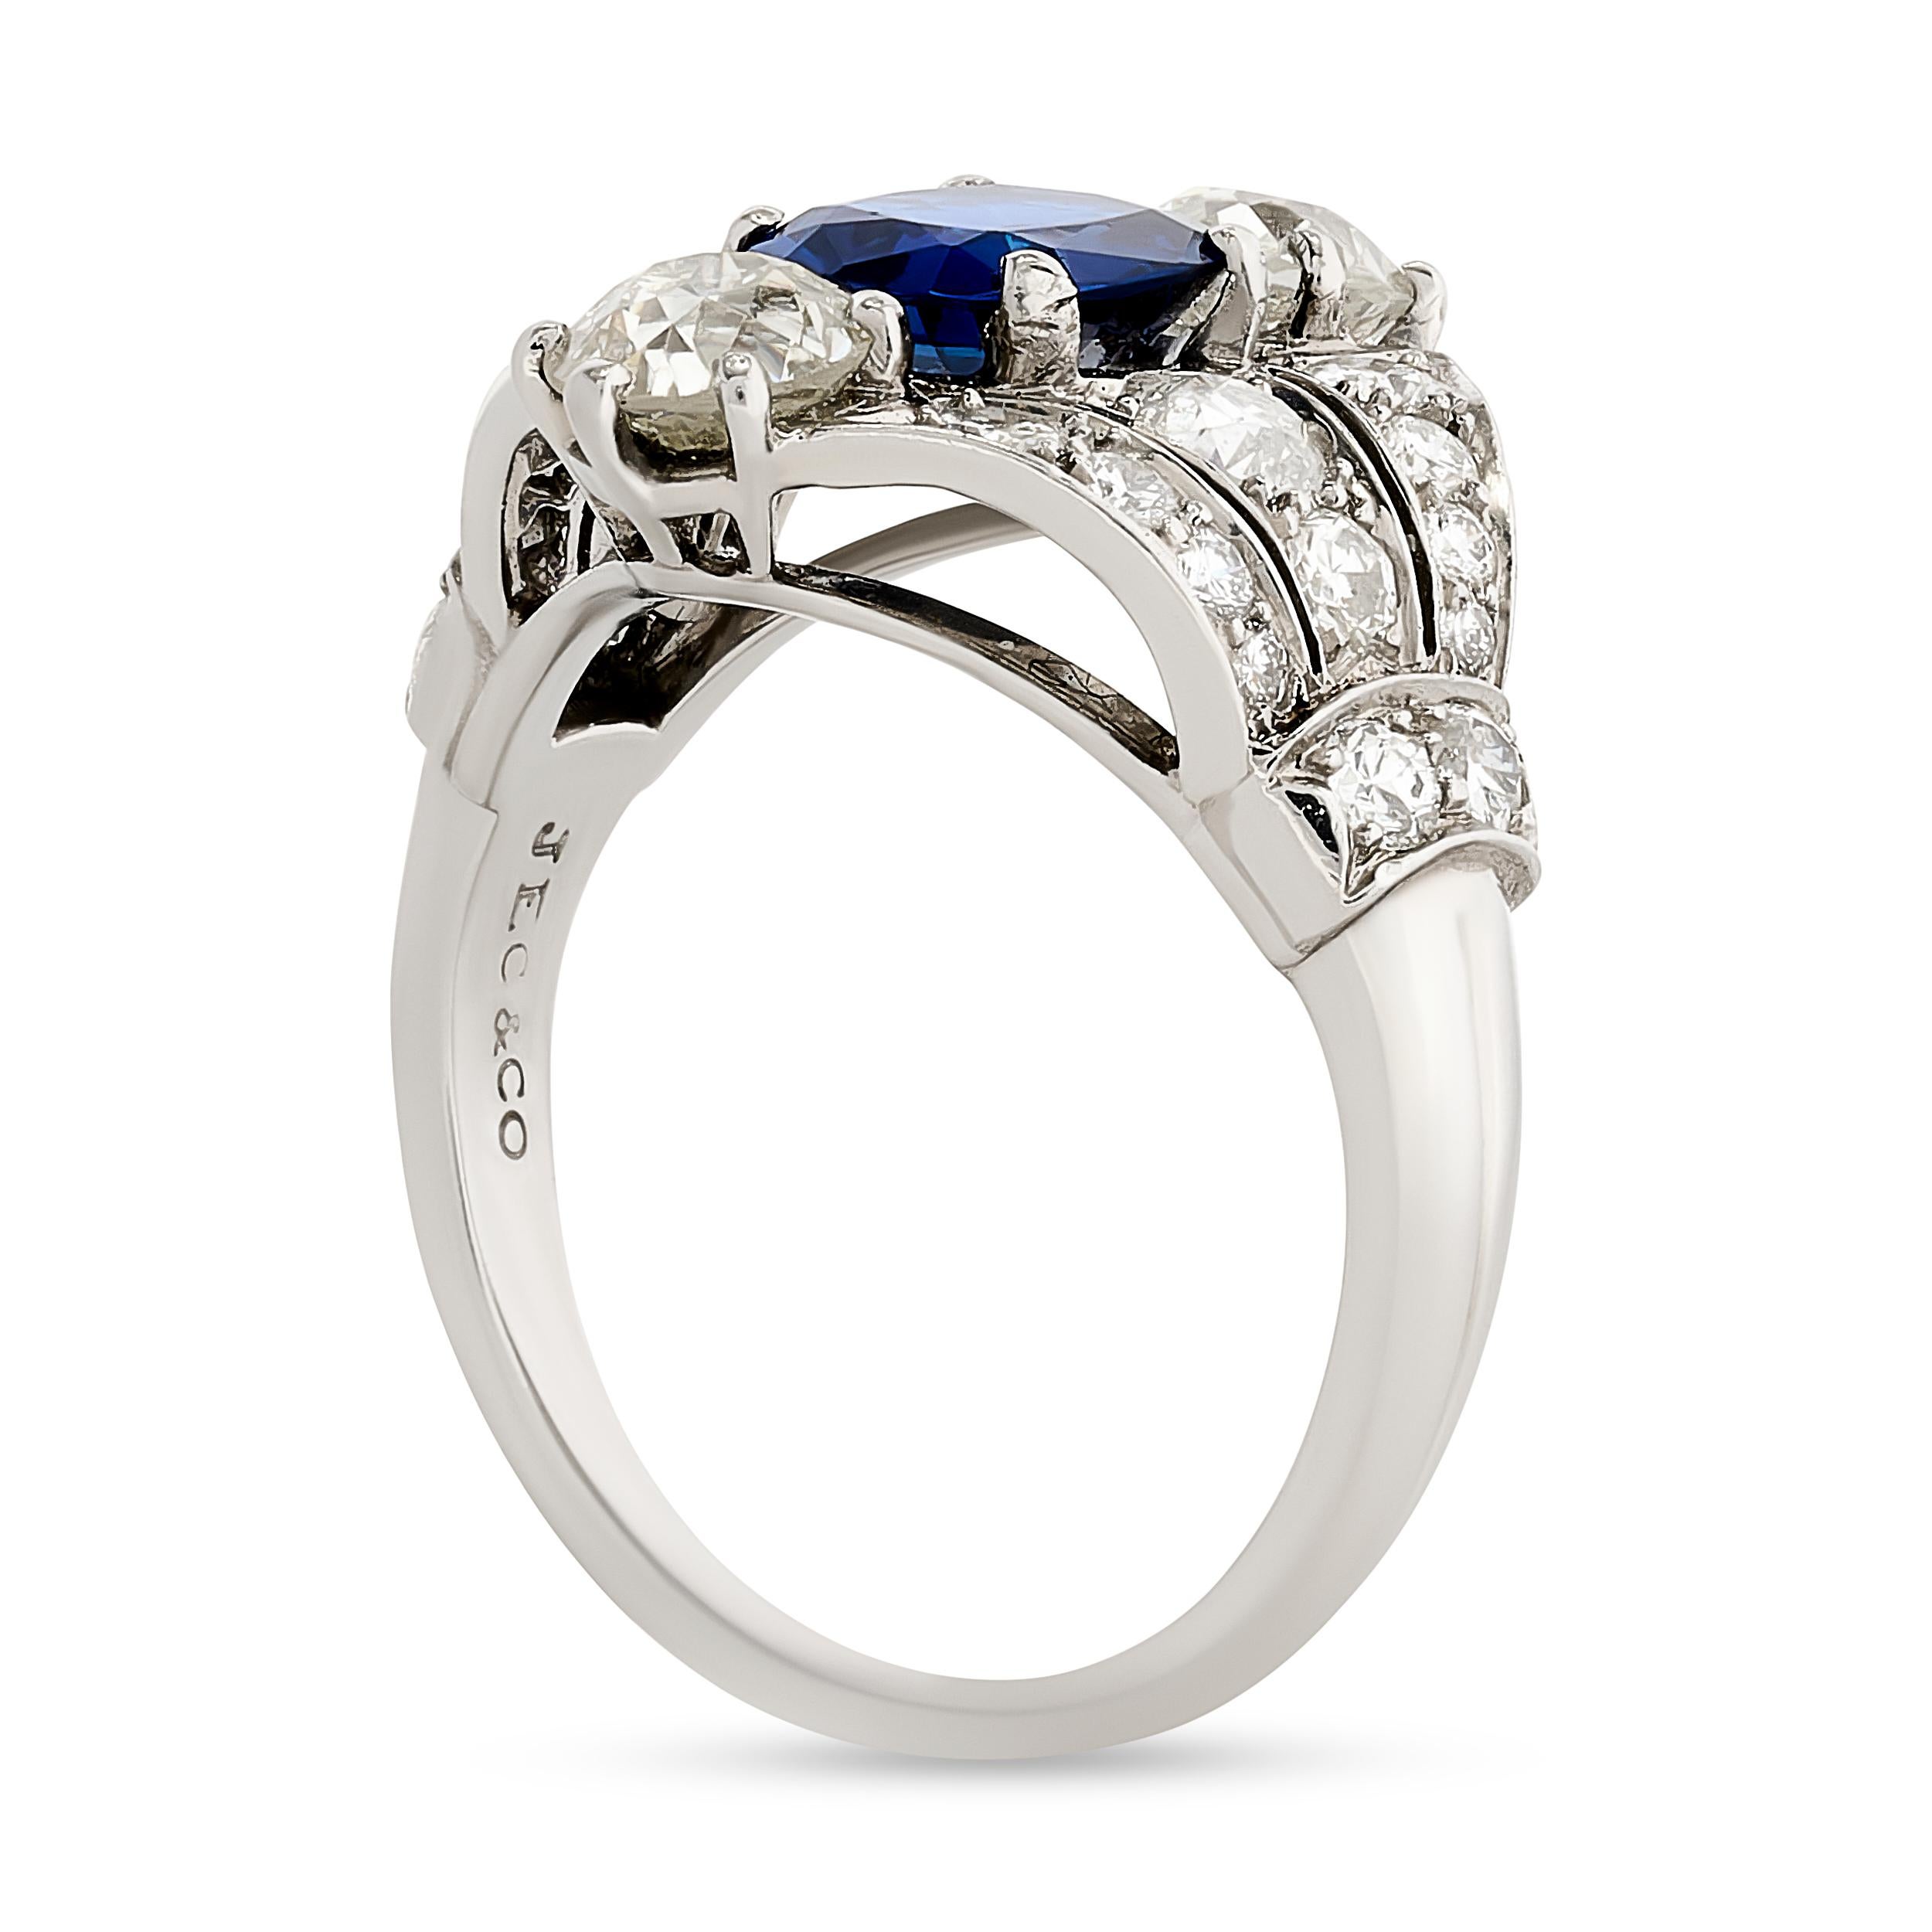 An antique pair of sapphire and diamond earrings crafted by J.E. Caldwell, with timeless elegance and meticulous craftsmanship.

The centerpiece of this ring is a 1.66 carat unheated cushion cut Cambodian sapphire accompanied by an AGL report. The